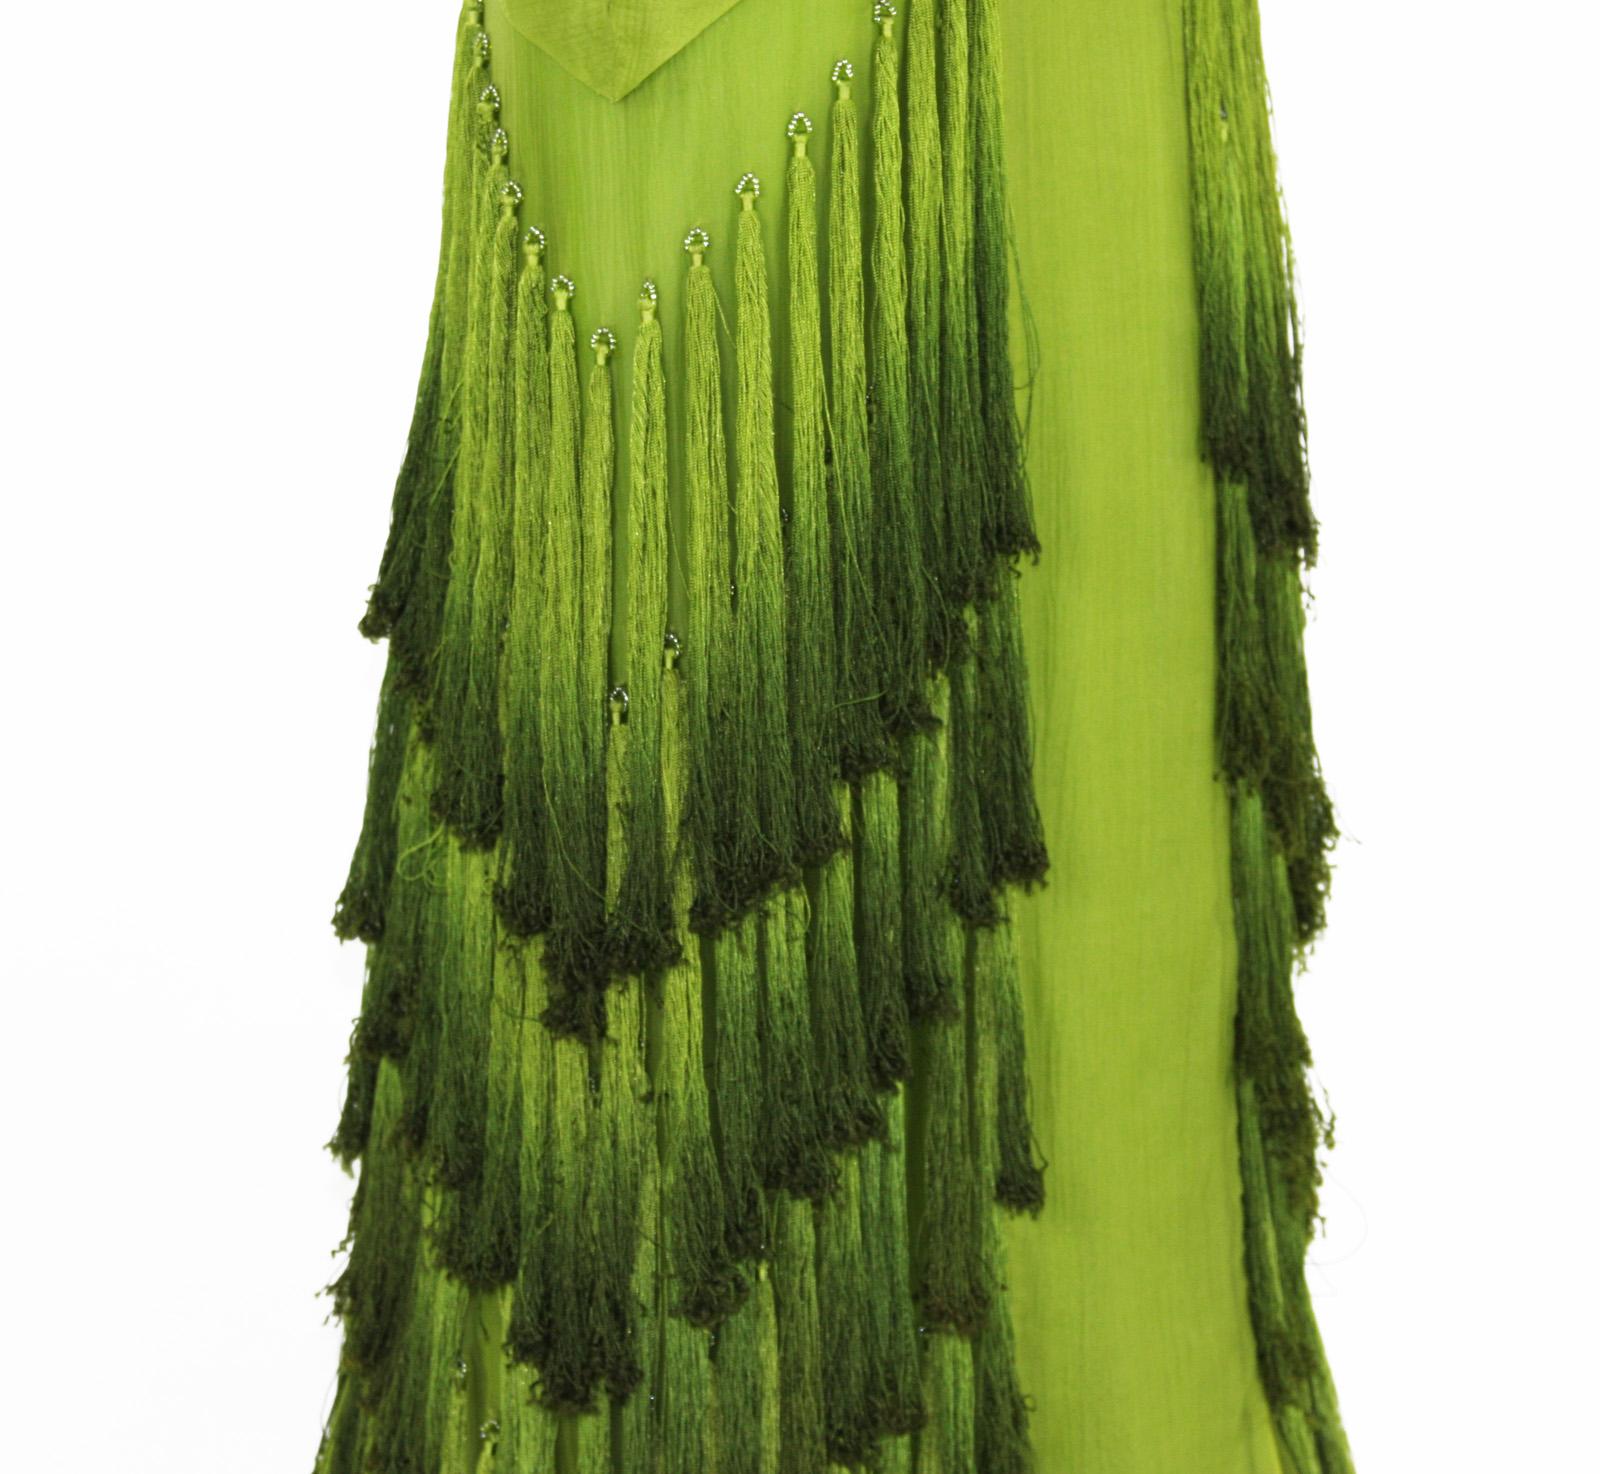 Tom Ford for Gucci 2004 F/W Collection Silk Green Tassel Dress Gown 40 - 4 2